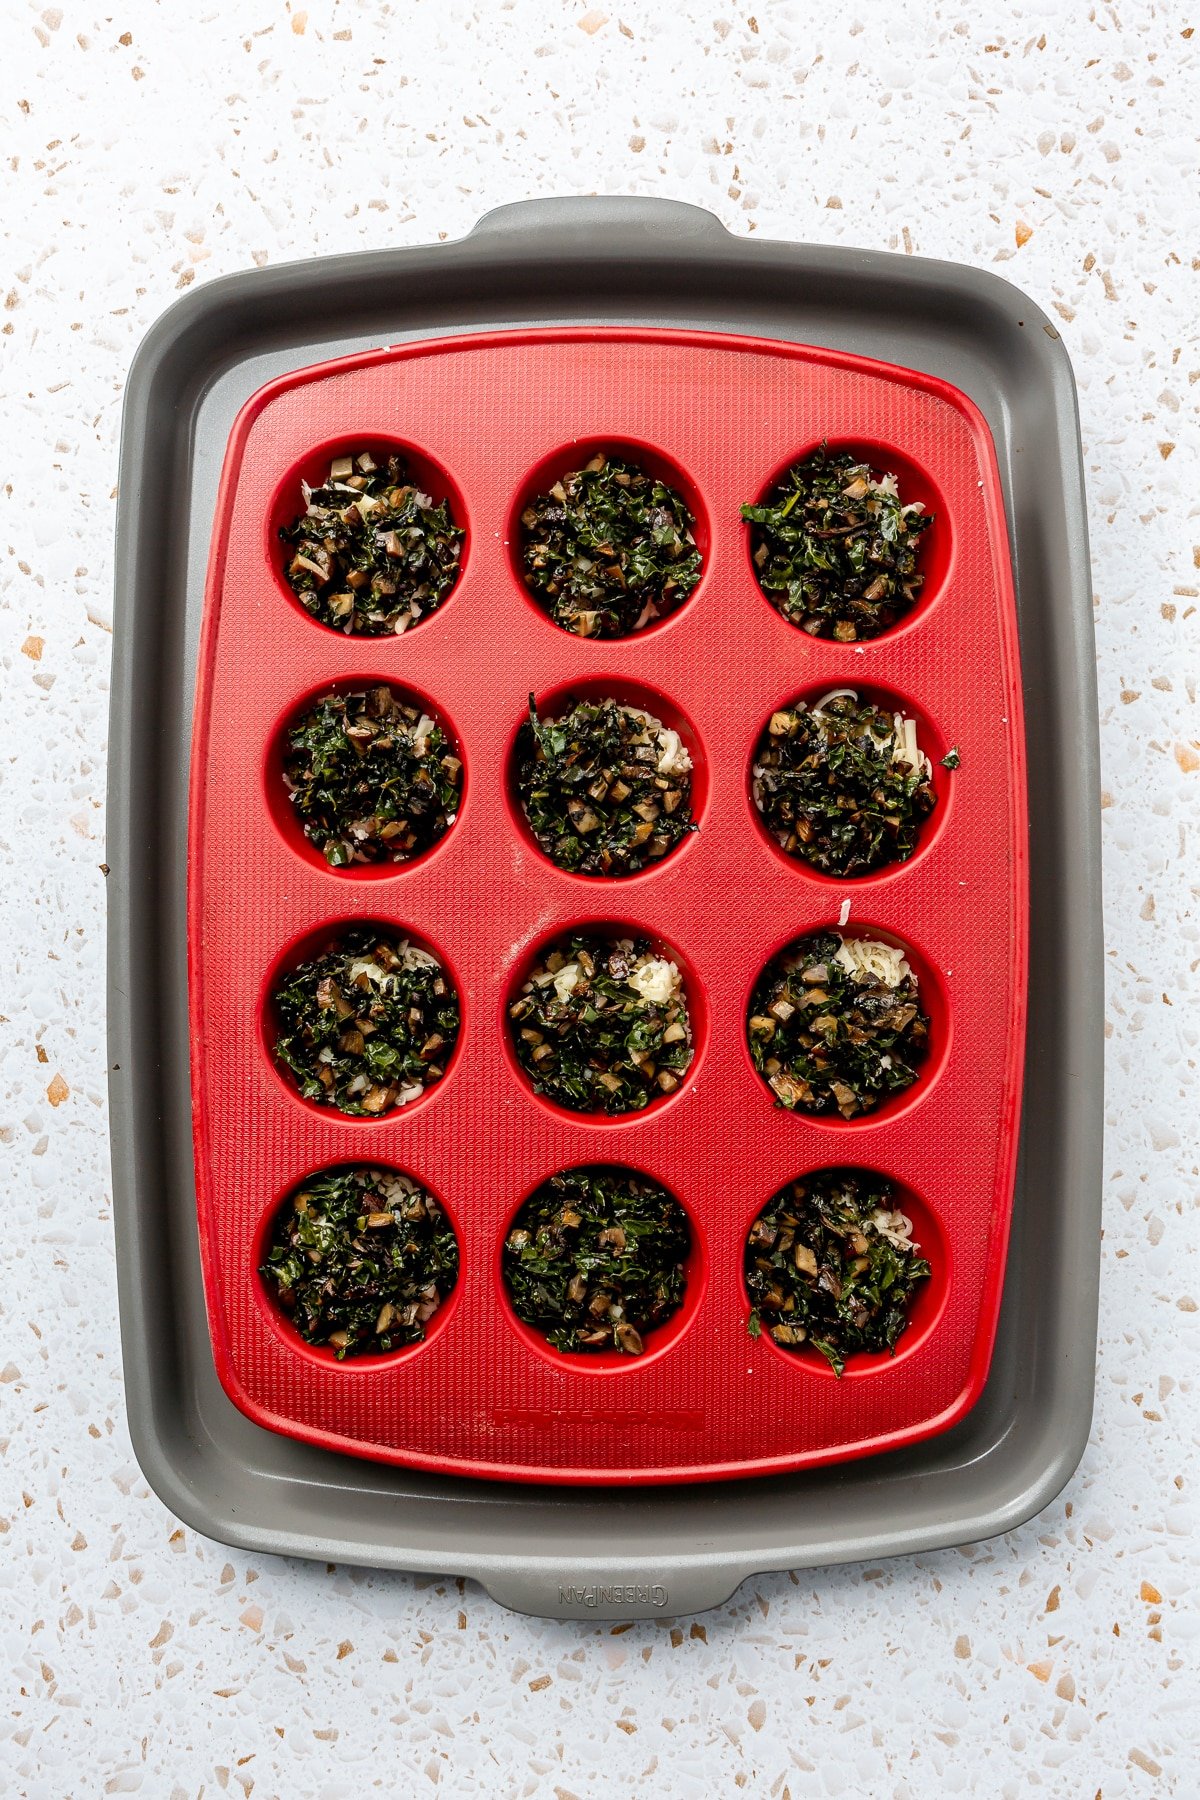 The roasted mushrooms and kale have been placed into a red, silicone muffin tray which sits on a metal baking tray.